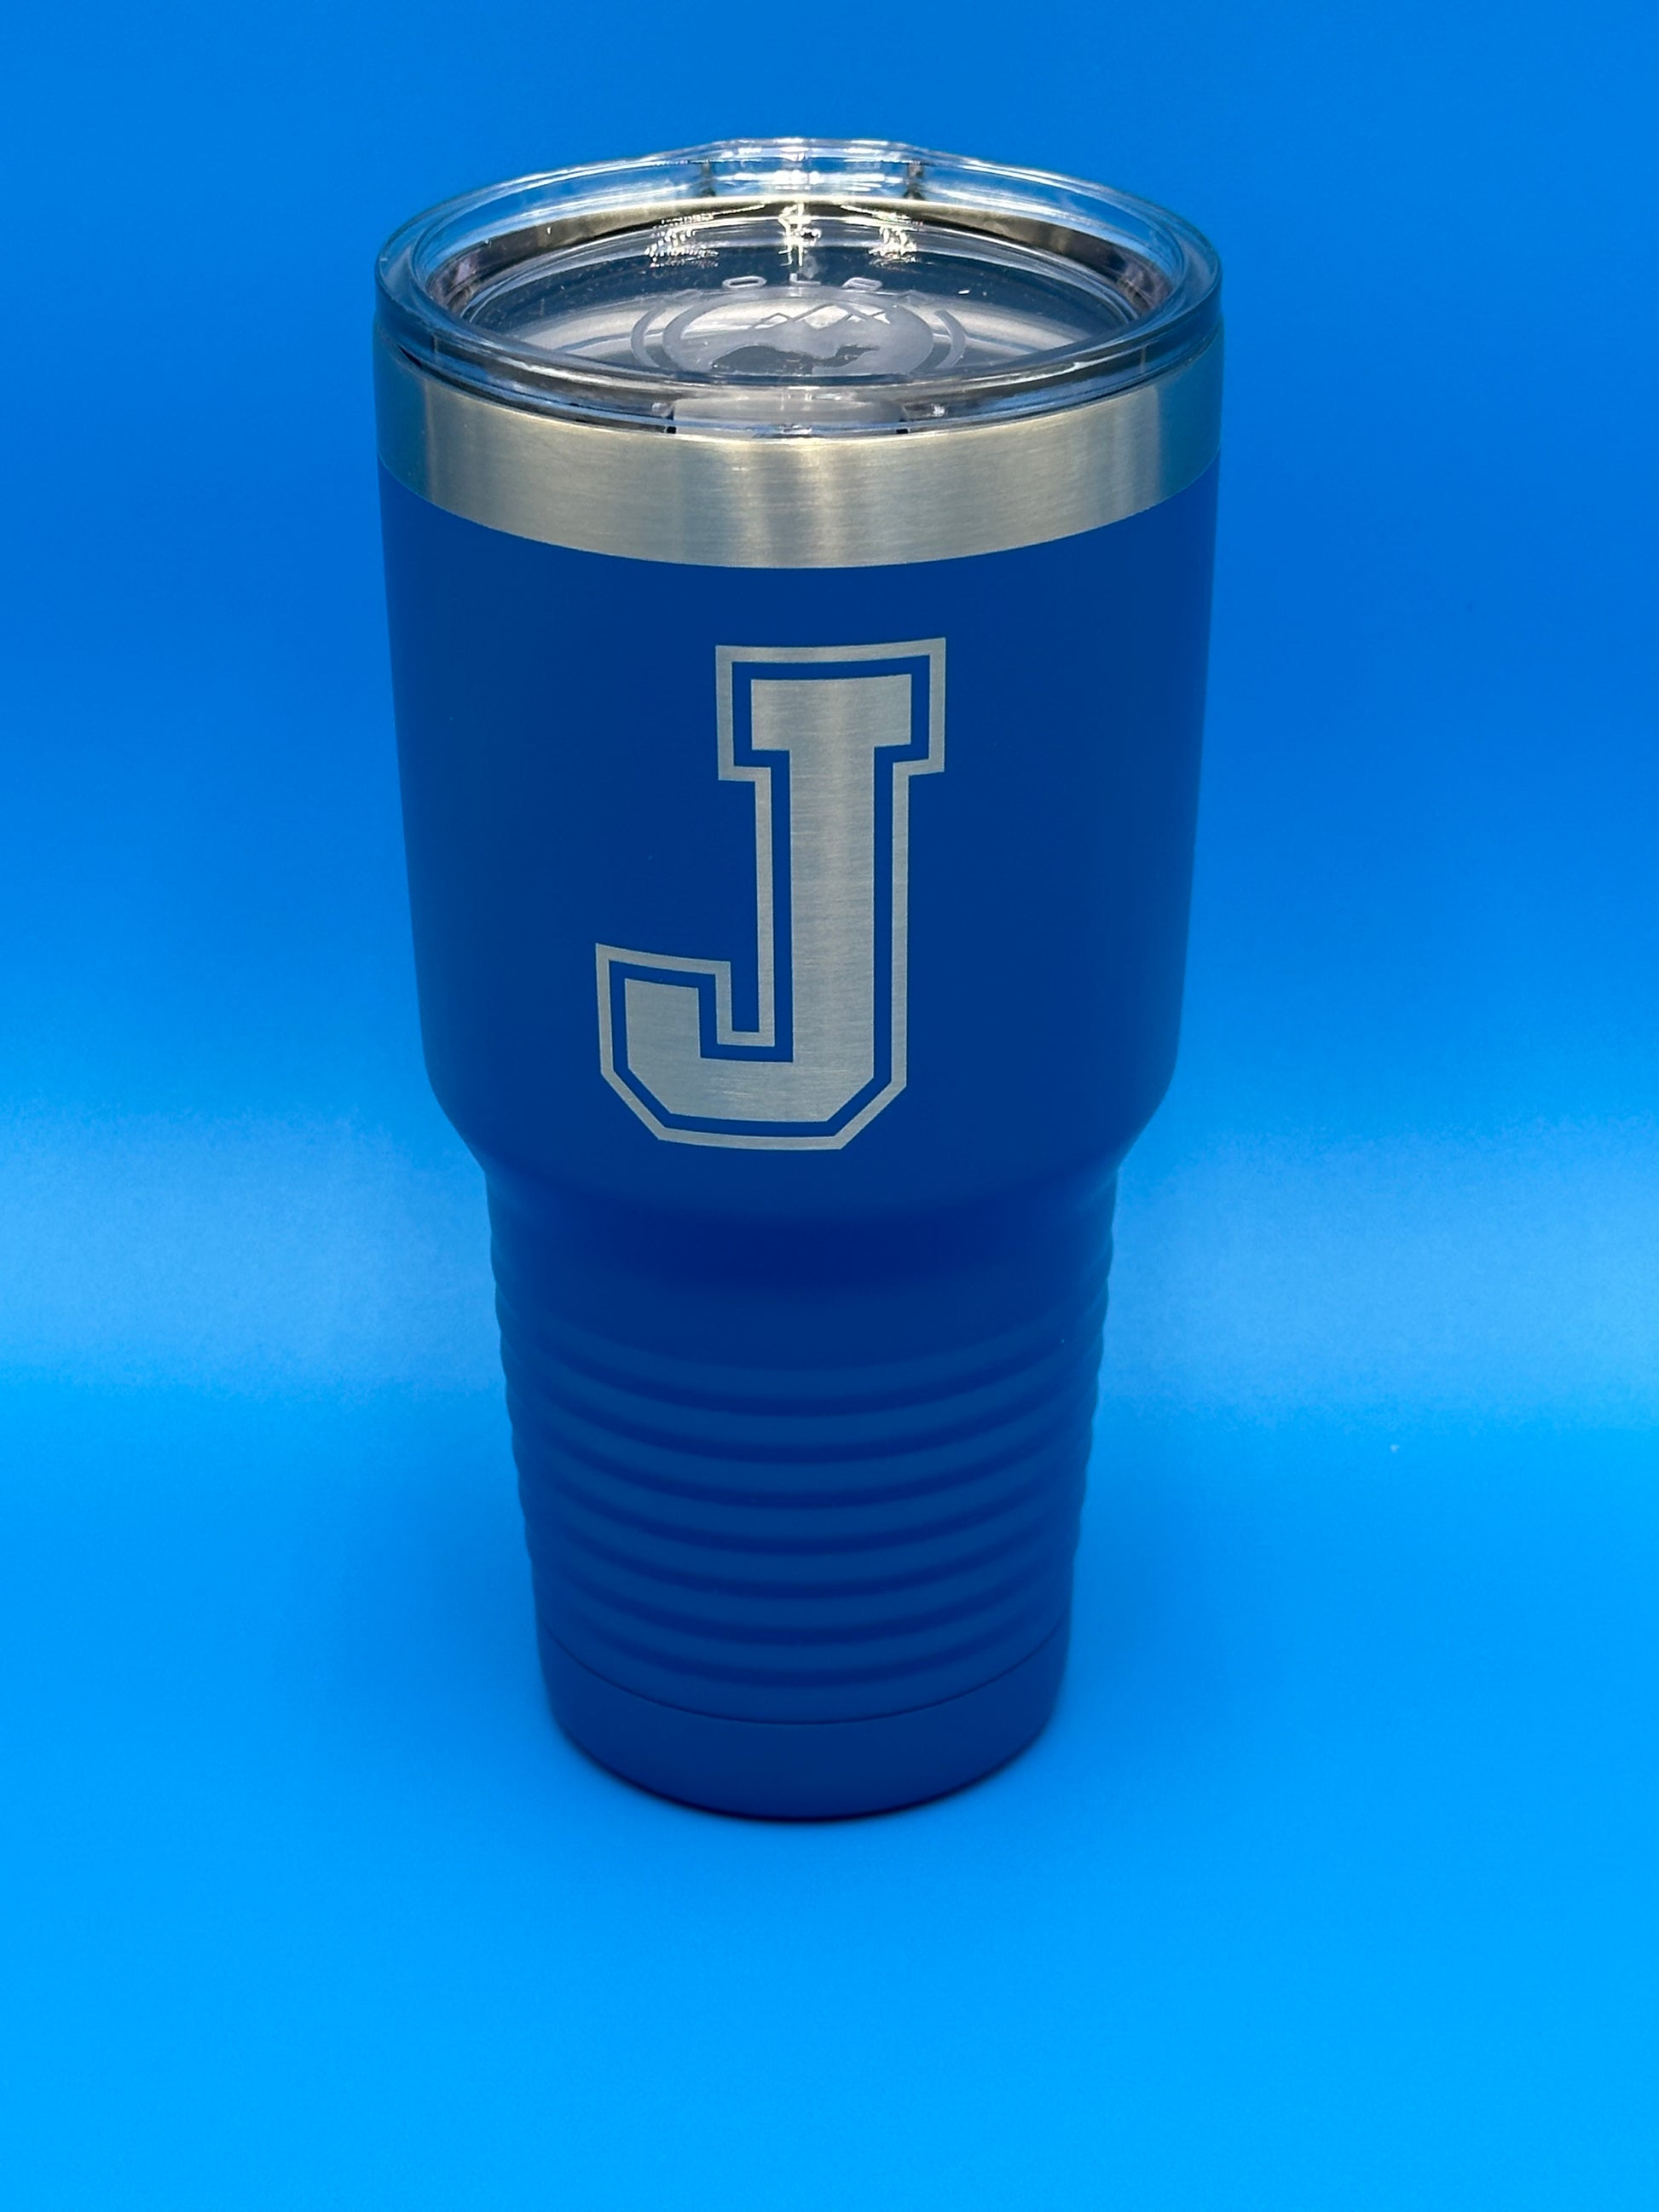 Polar Camel.  Double wall vacuum insulation. Hot/Cold Retention. Powder coated blue finish.  Laser engraved.  J logo.  Hand Wash Only.